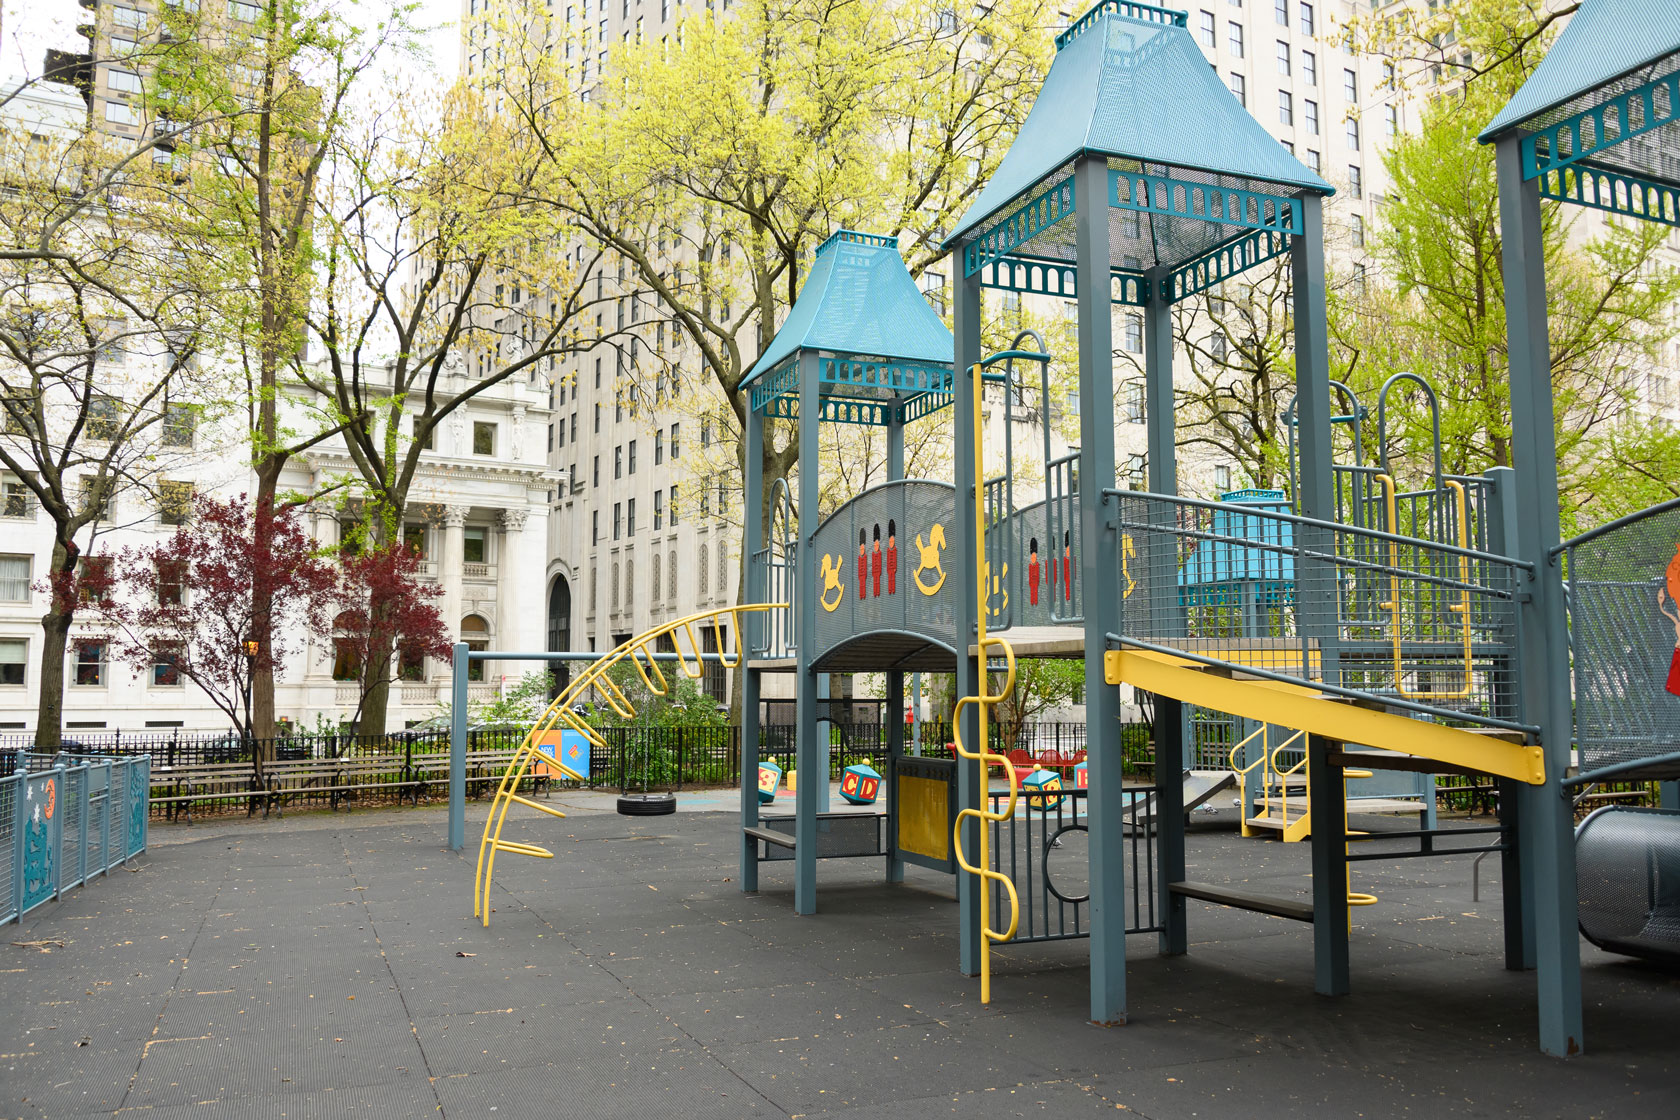 Playground in New York City is seen closed during the COVID-19 pandemic.